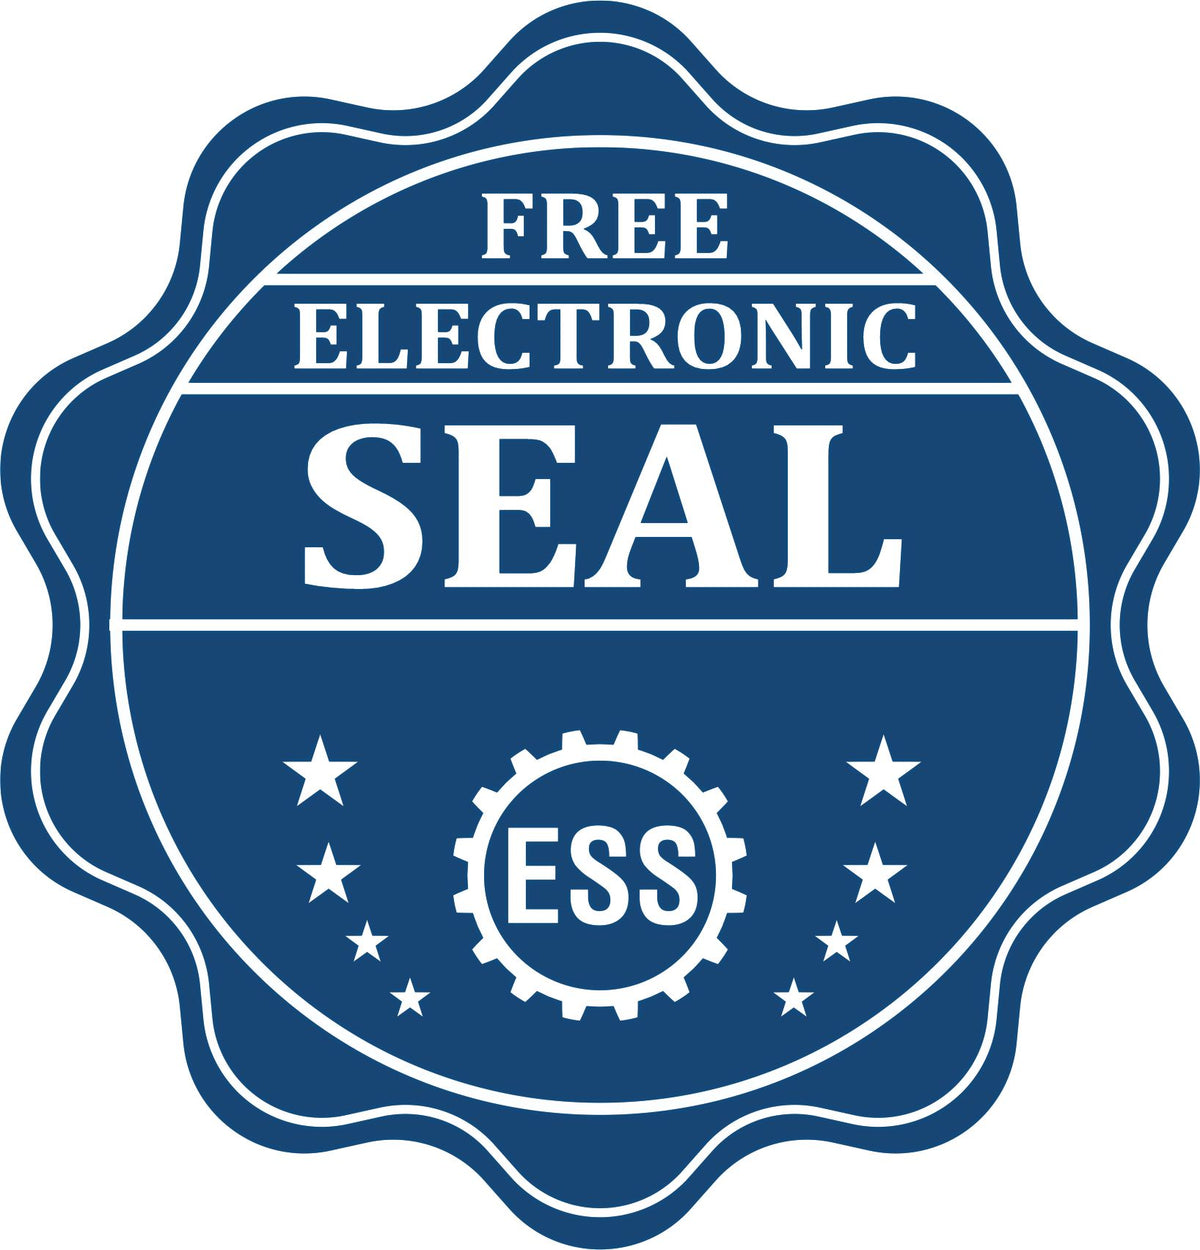 A badge showing a free electronic seal for the Alaska Desk Surveyor Seal Embosser with stars and the ESS gear on the emblem.